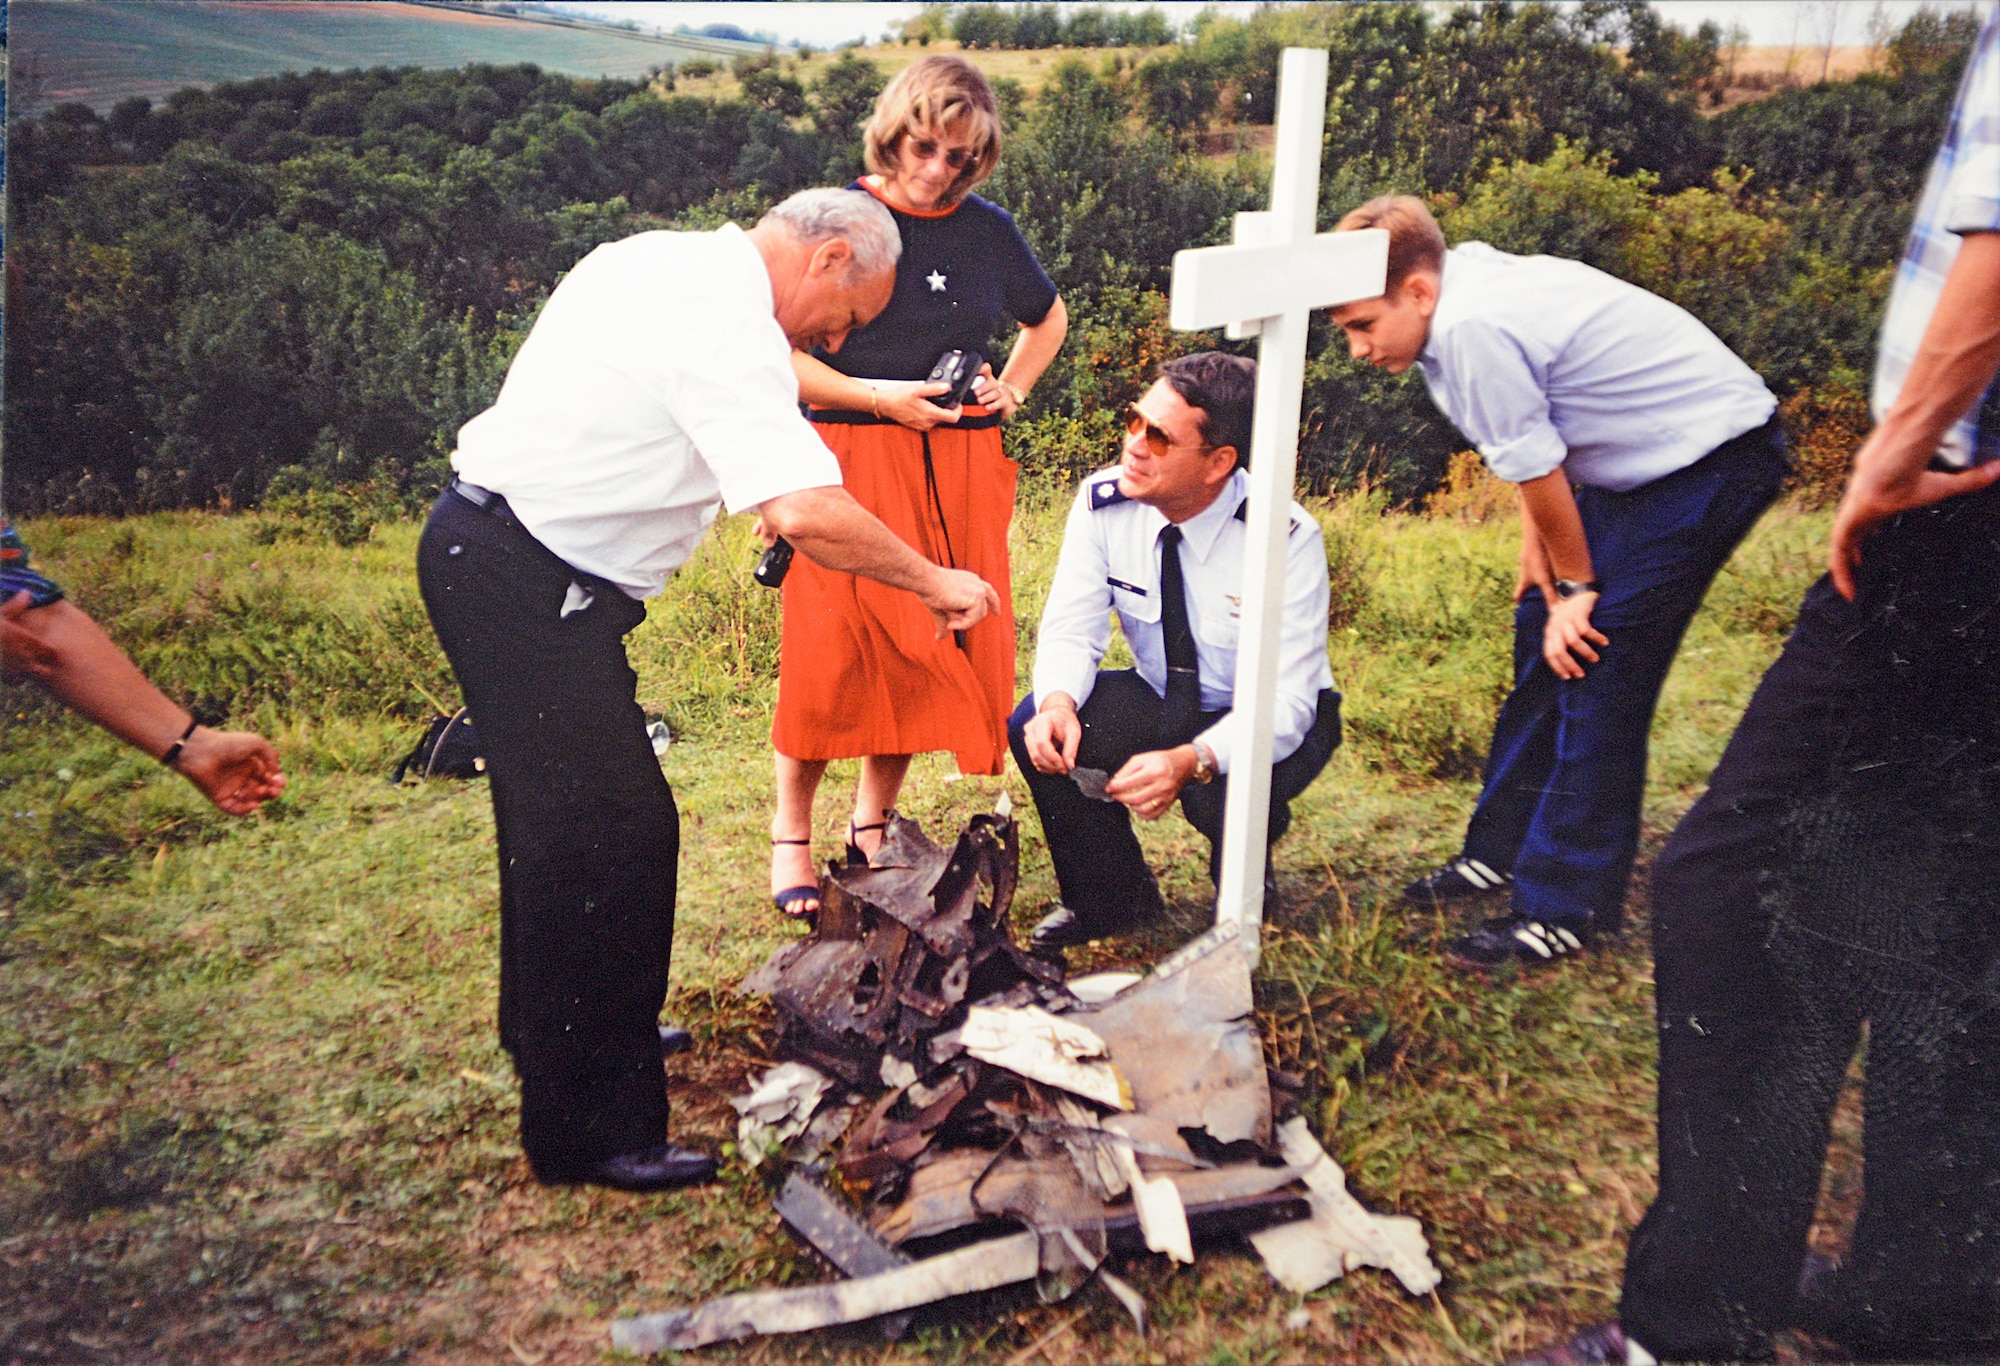 Lt. Col. Monty Hand (center kneeling), U.S. Air Forces in Europe, meets with the brothers who discovered the crash site in Vogelsberg, Germany. Now retired, Mr. Monty Hand returned to the memorial to celebrate the 50th anniversary of the crash.  (Courtesy Photo)